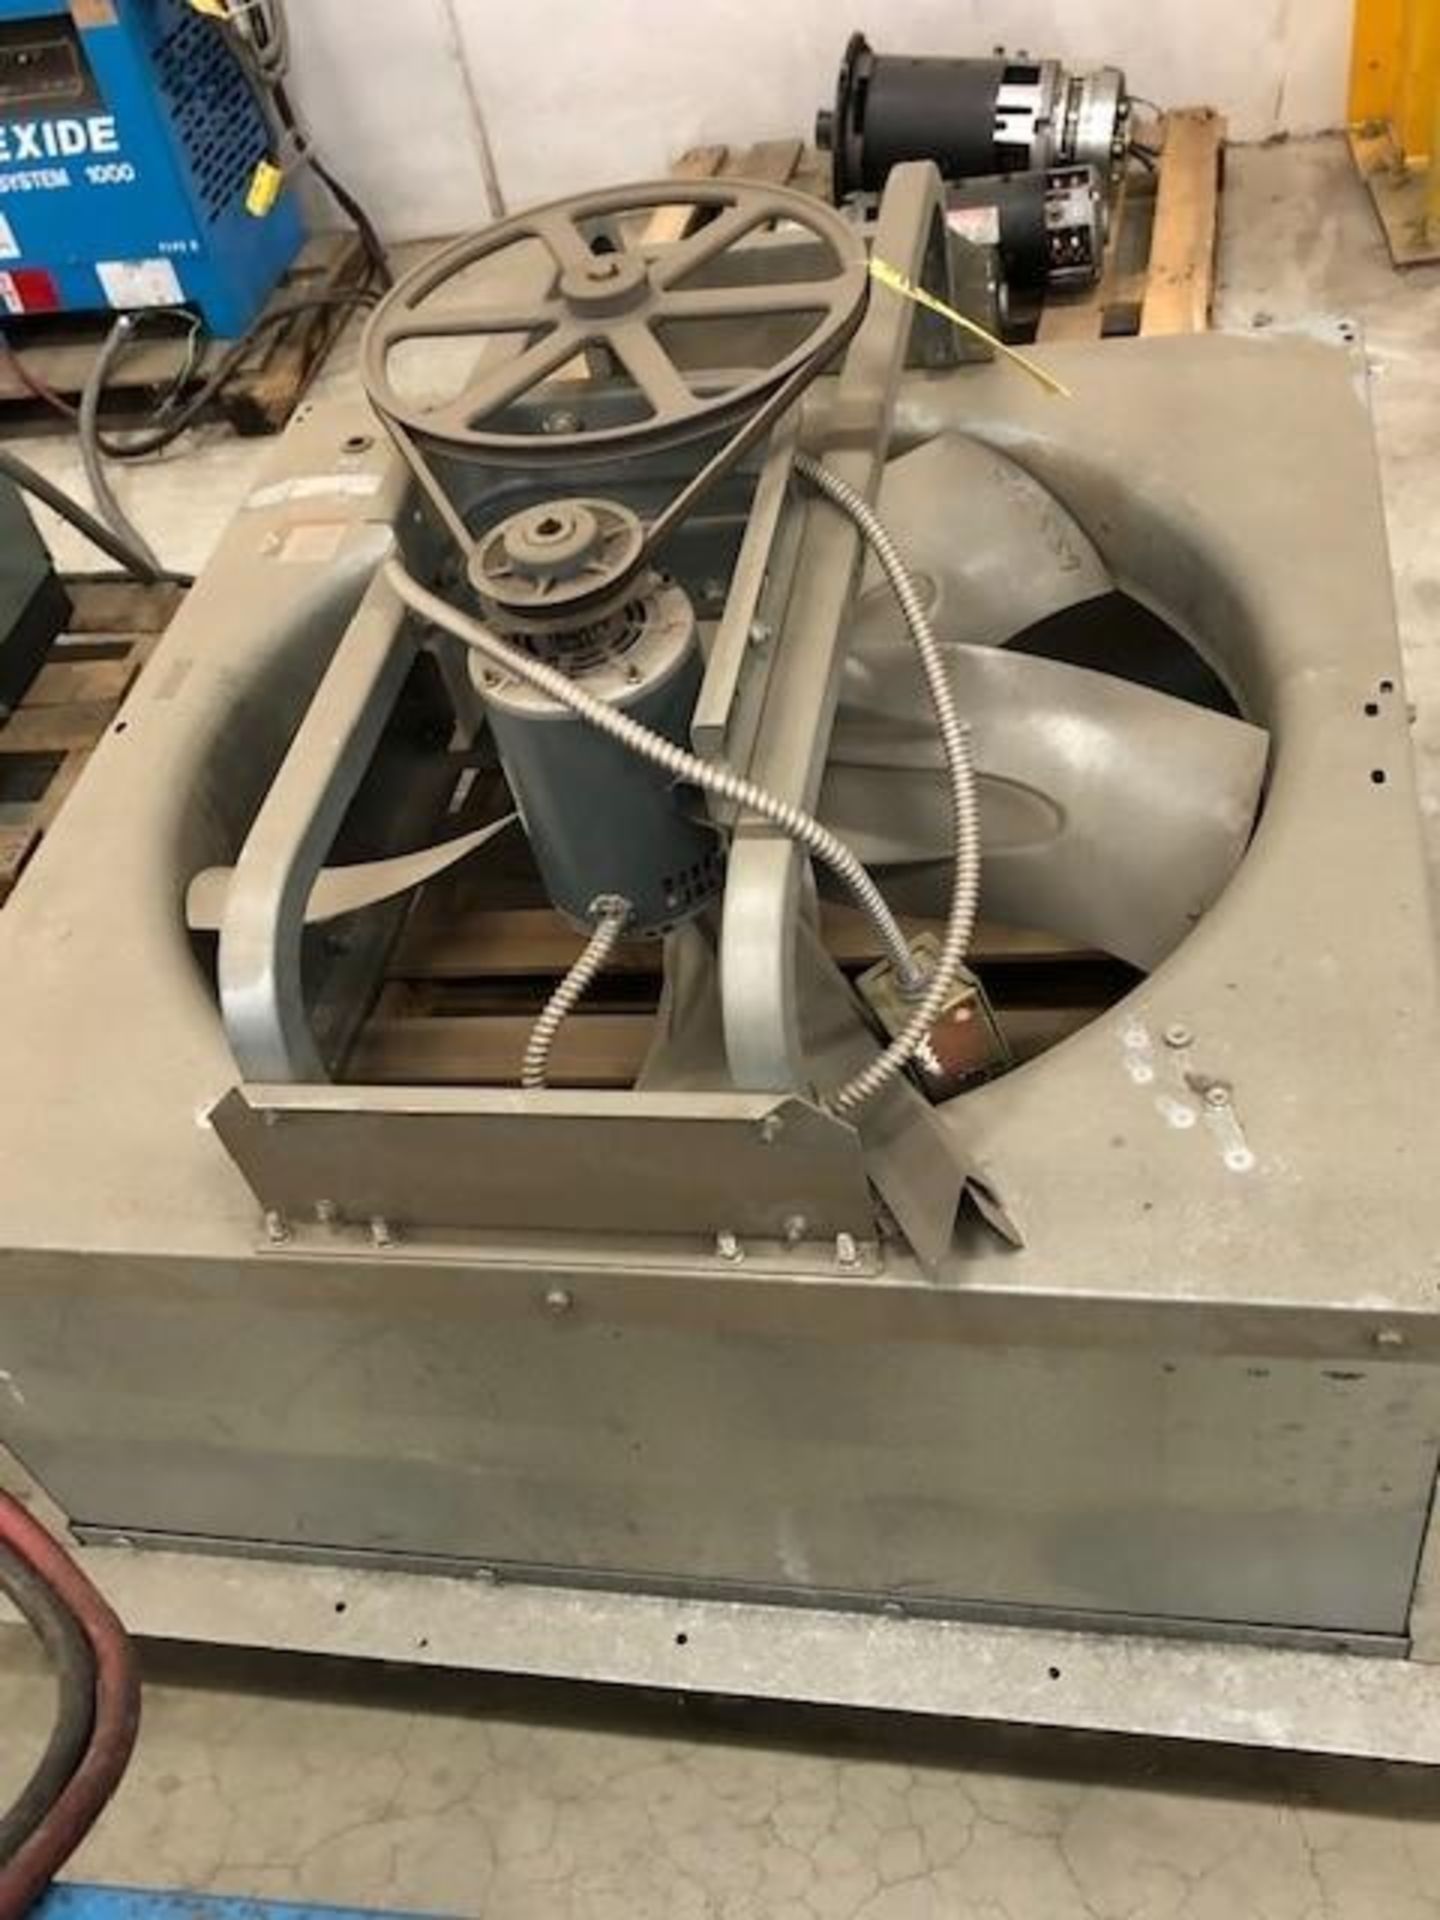 GREENHECK EXHAUST FAN; MODEL SBE-1136-7, S/N 00006388 ***LOCATED AT 13000 DARICE PARKWAY, - Image 3 of 4